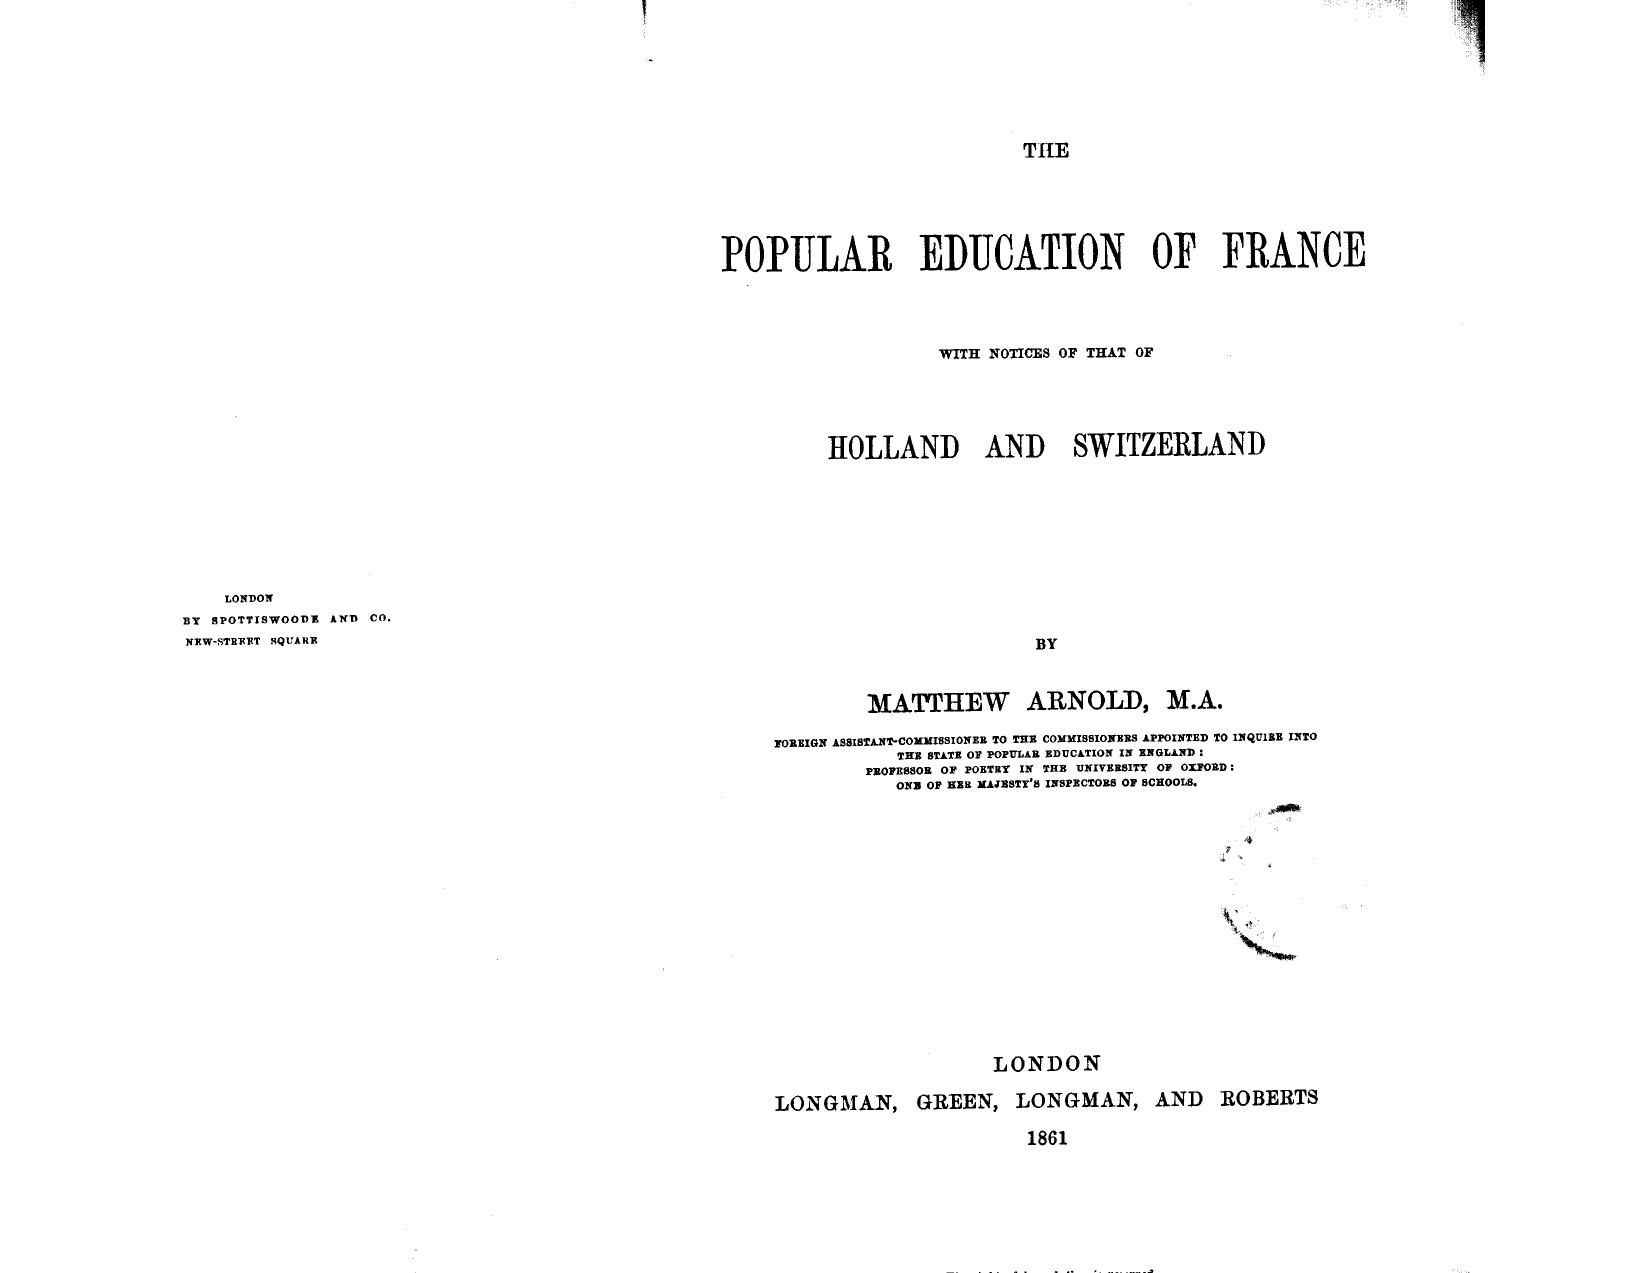 Arnold, BY Matthew Arnold - The popular education of france by 1861